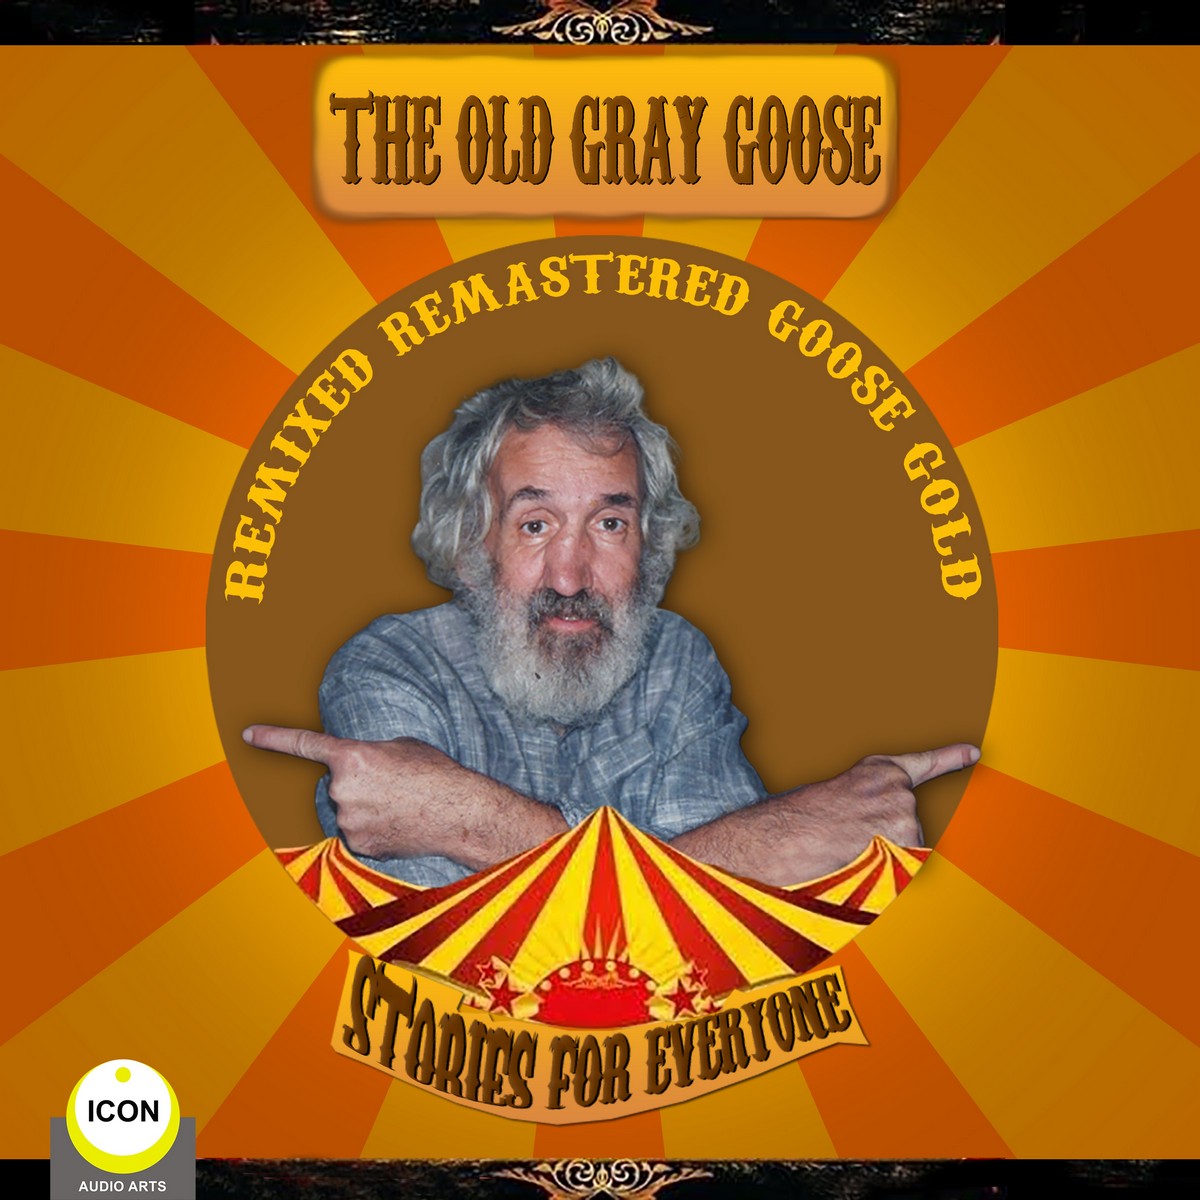 The Old Gray Goose – Remixed, Remasted, Goose Gold – Stories For Everyone